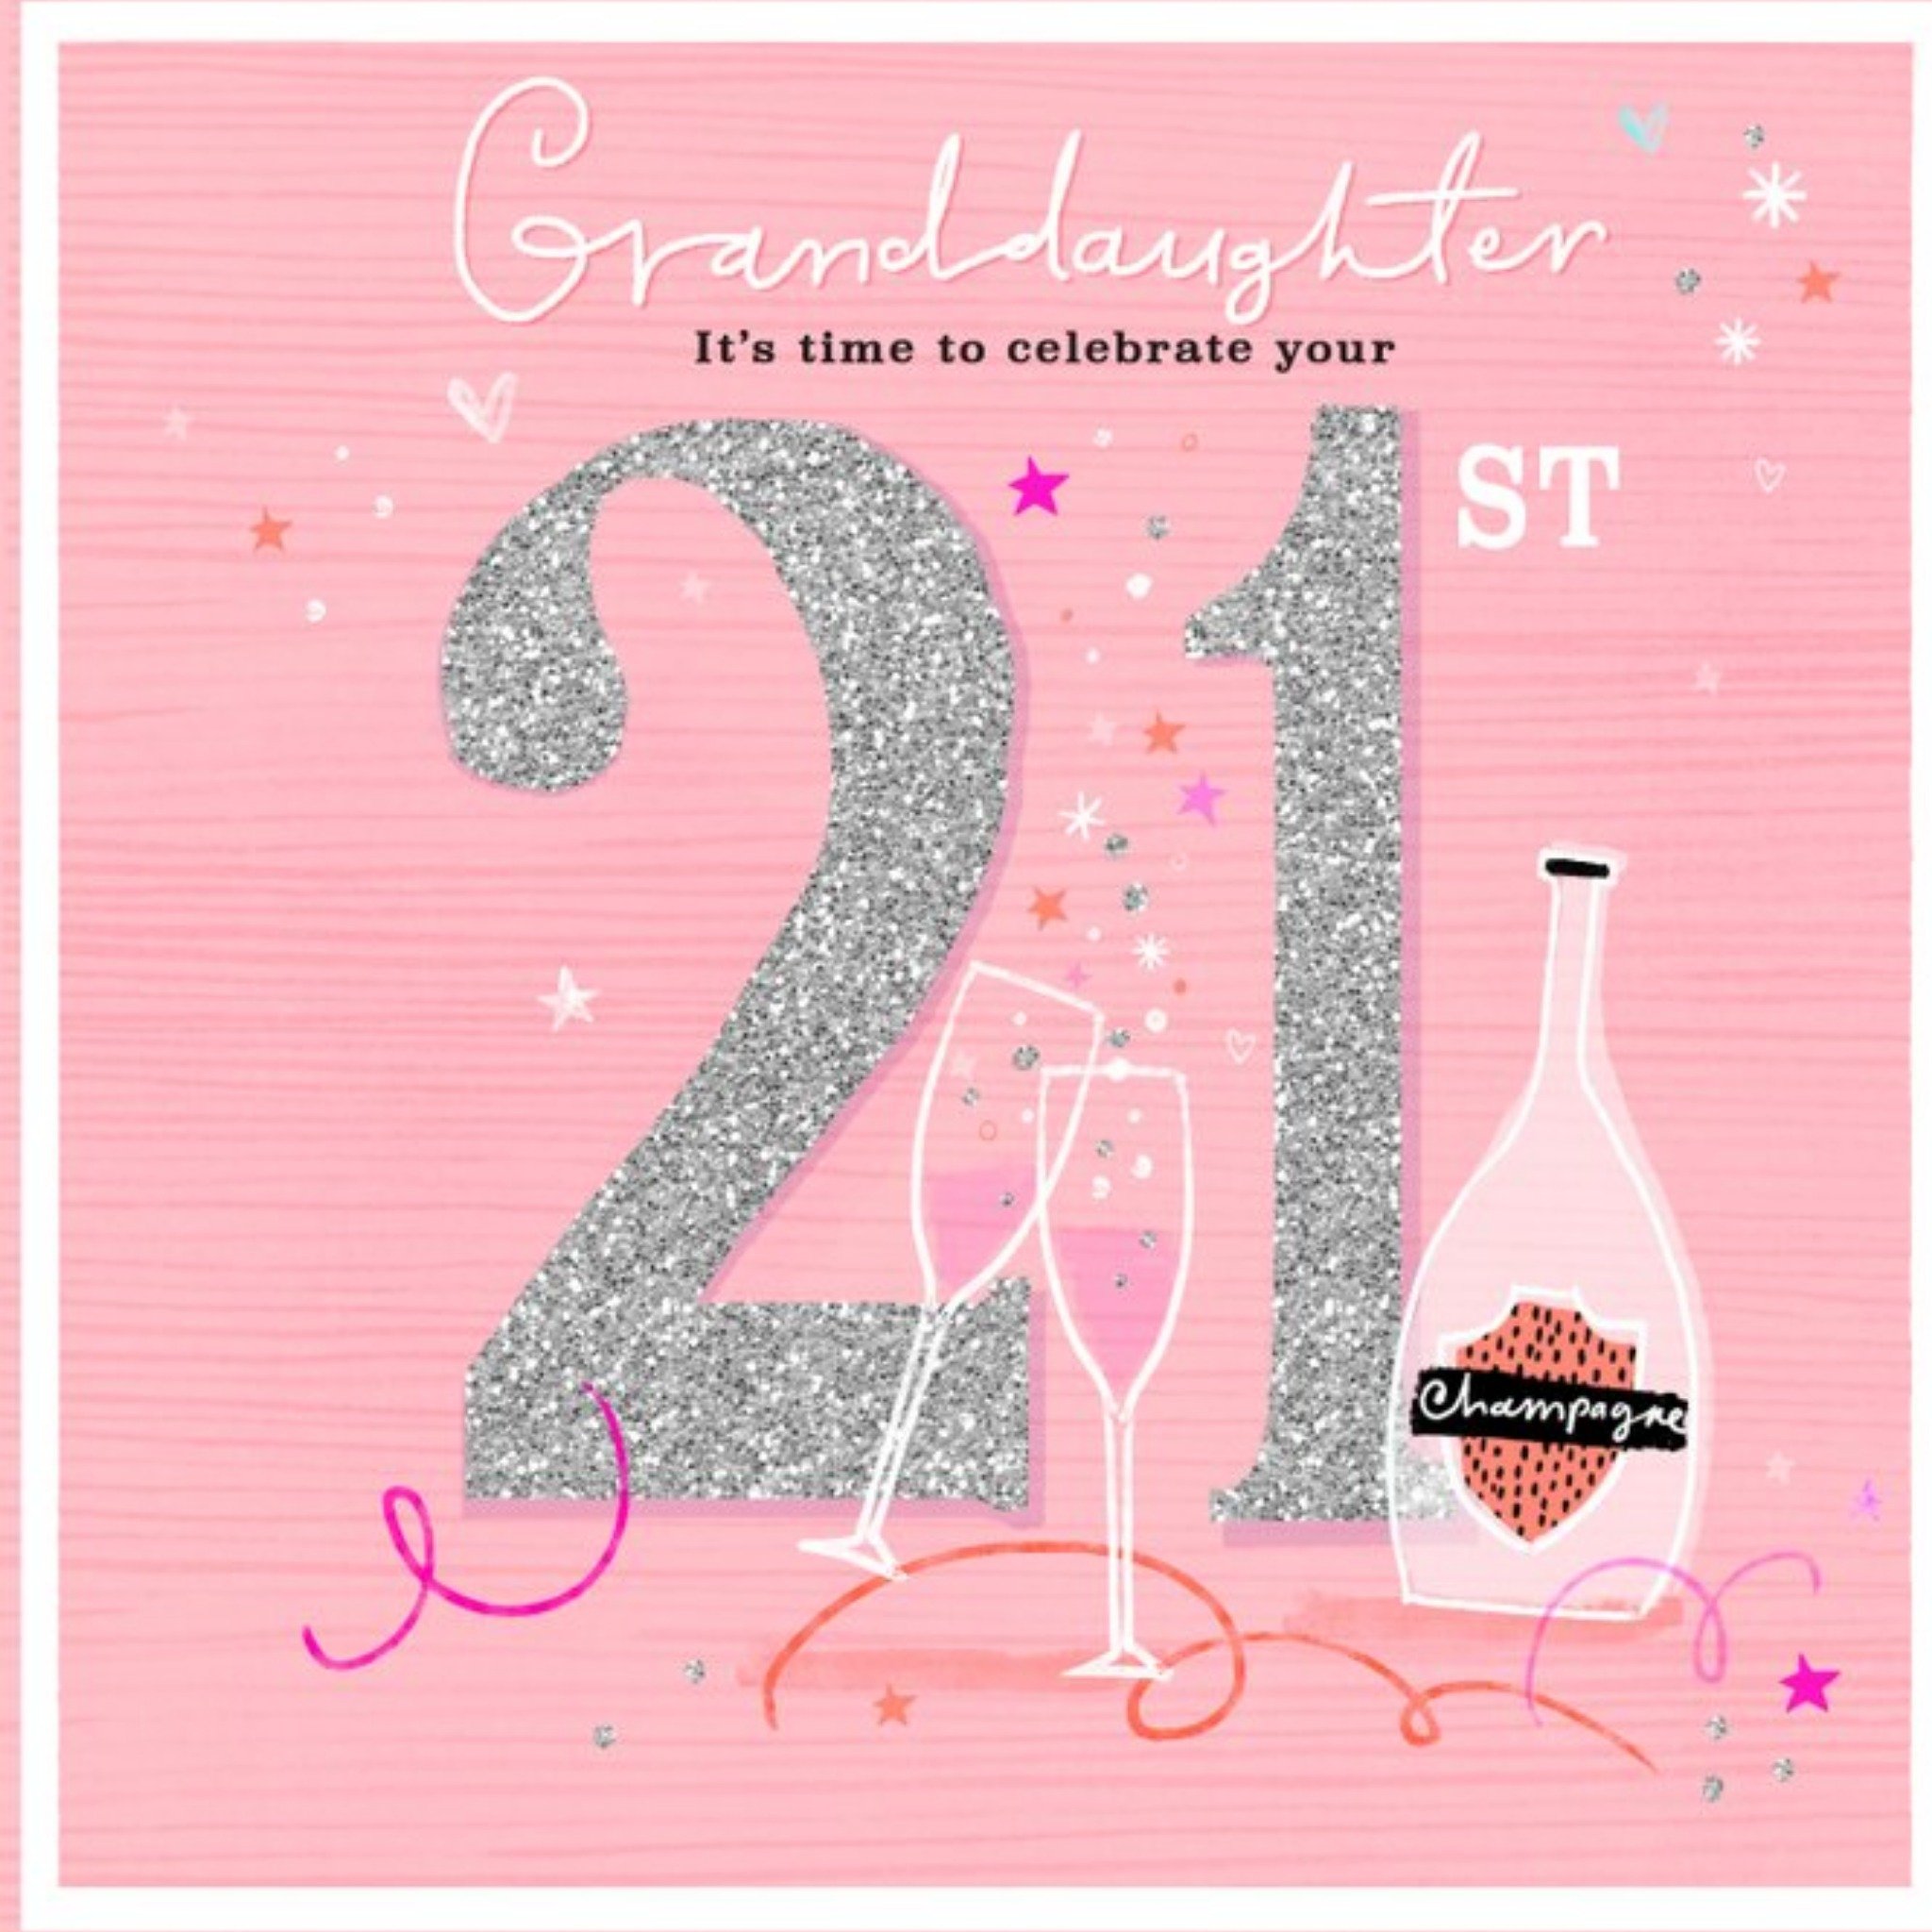 Moonpig Typographic Design Drinks Champagne Granddaughter 21st Birthday Card, Large